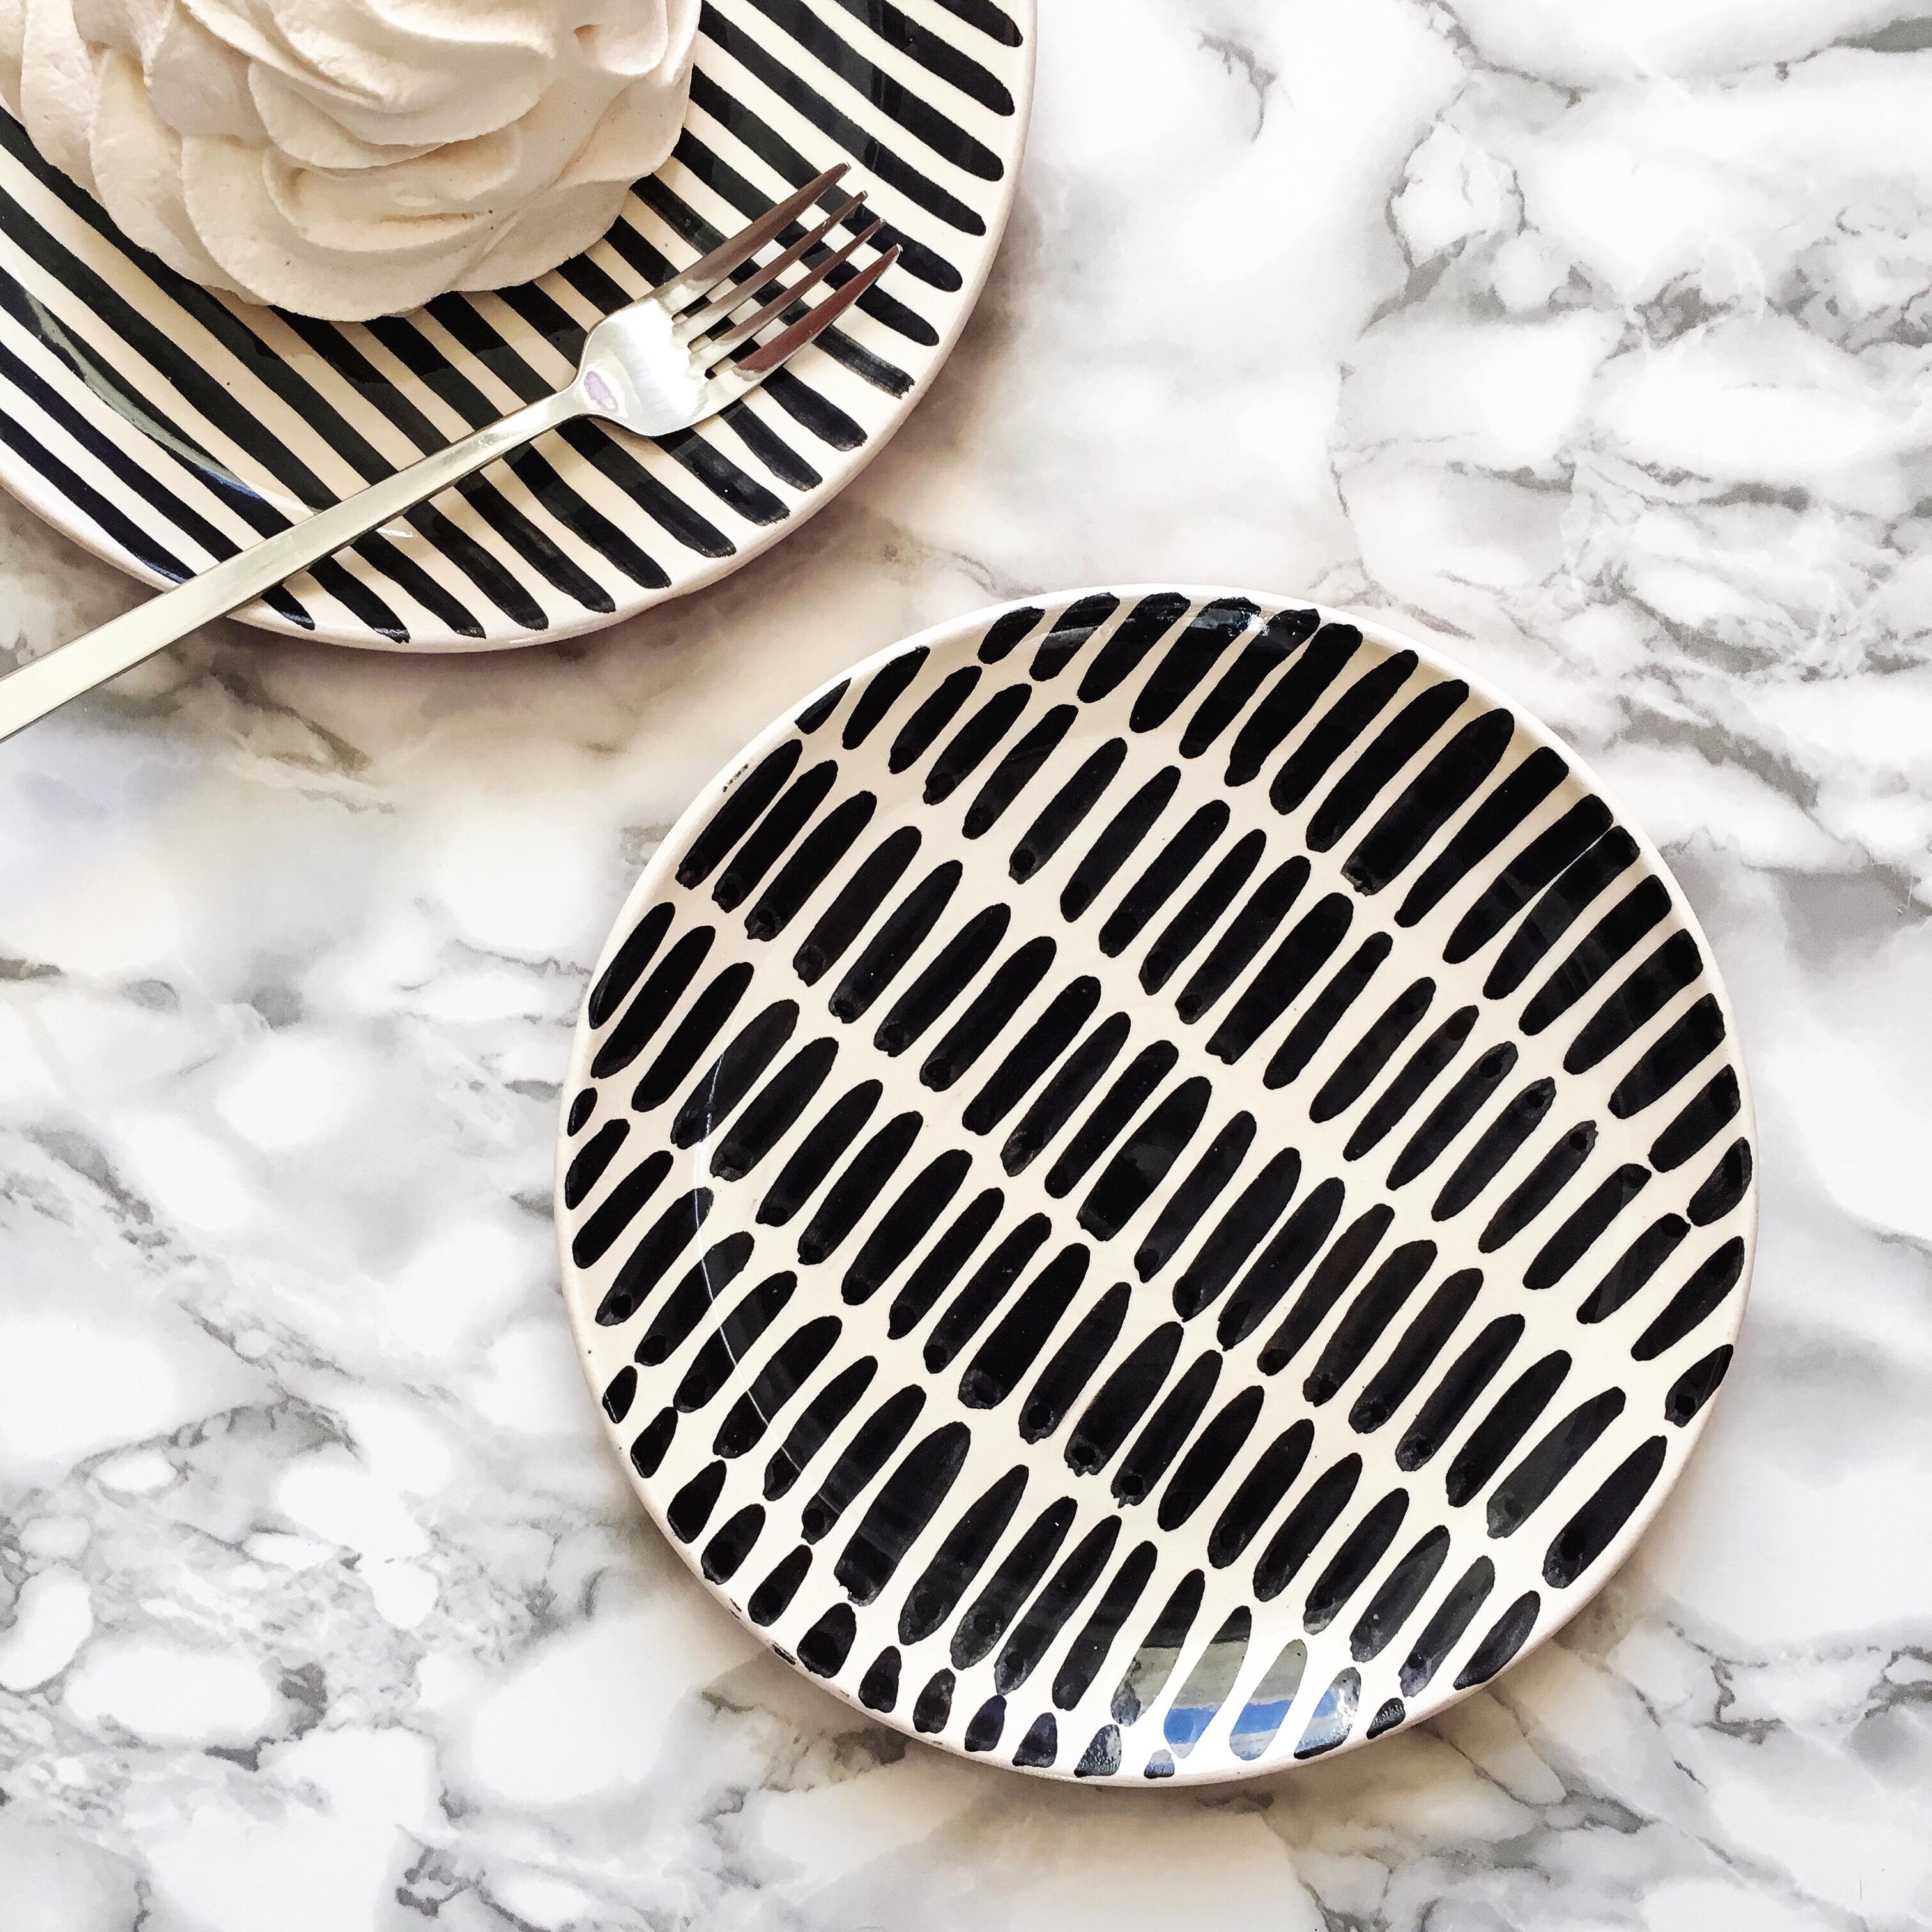 Handmade Black and White Ceramic Dash Pattern Dinner Plates, in Stock In New Condition For Sale In West Hollywood, CA